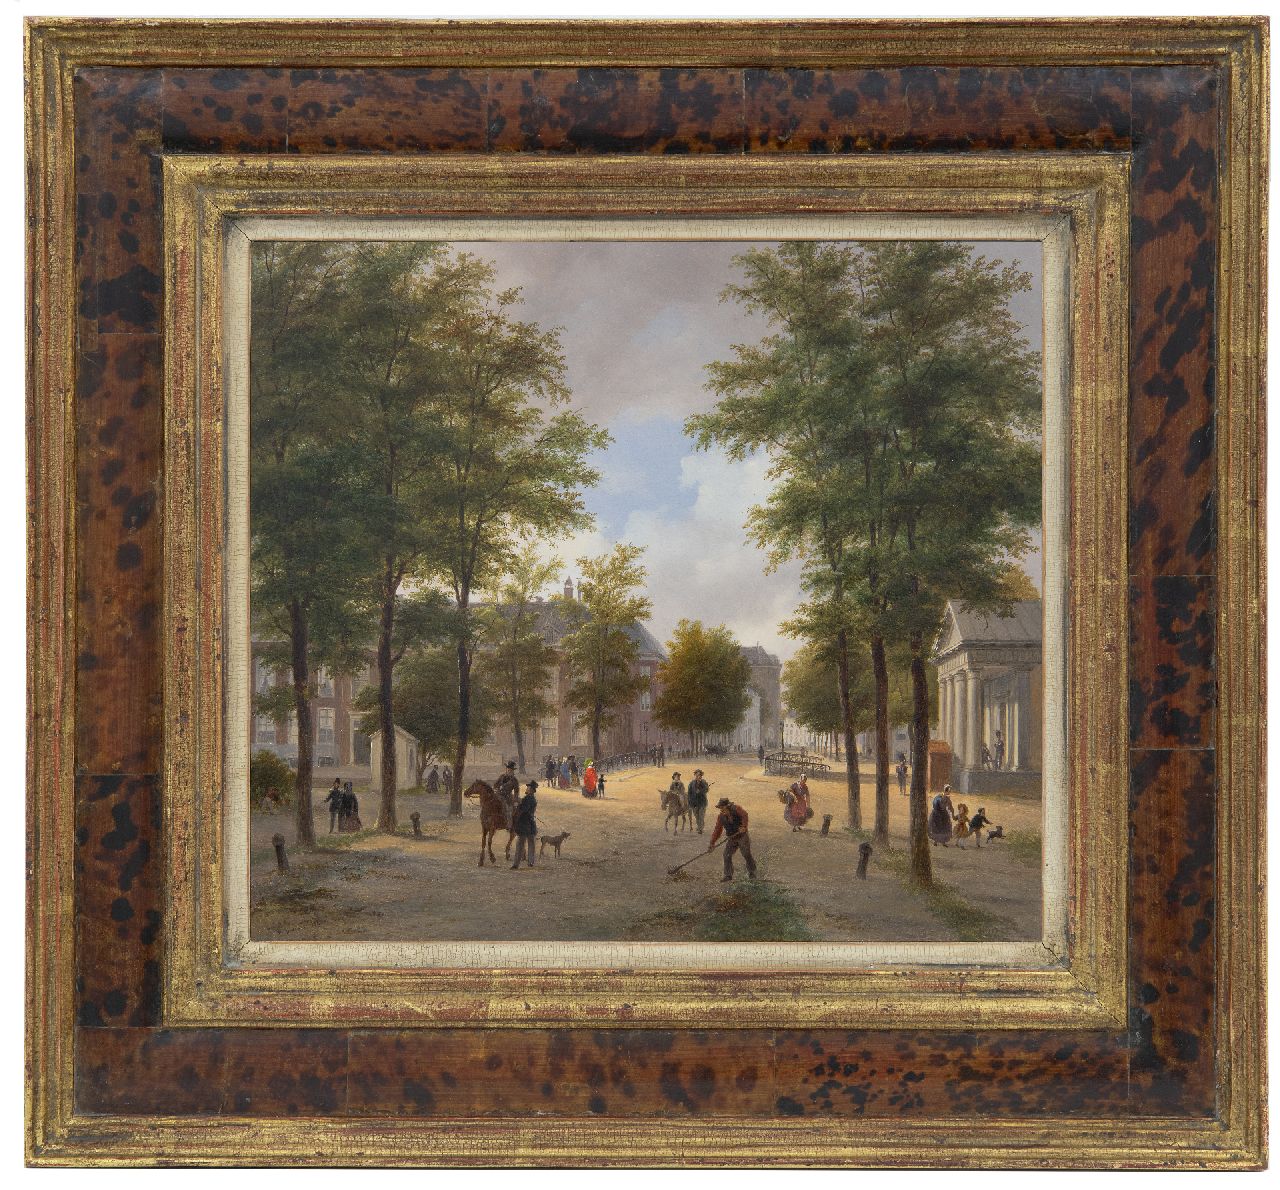 Hove B.J. van | Bartholomeus Johannes 'Bart' van Hove | Paintings offered for sale | Korte Voorhout, The Hague, with the Wachtje at the Malieveld, oil on panel 28.8 x 32.8 cm, signed l.l.